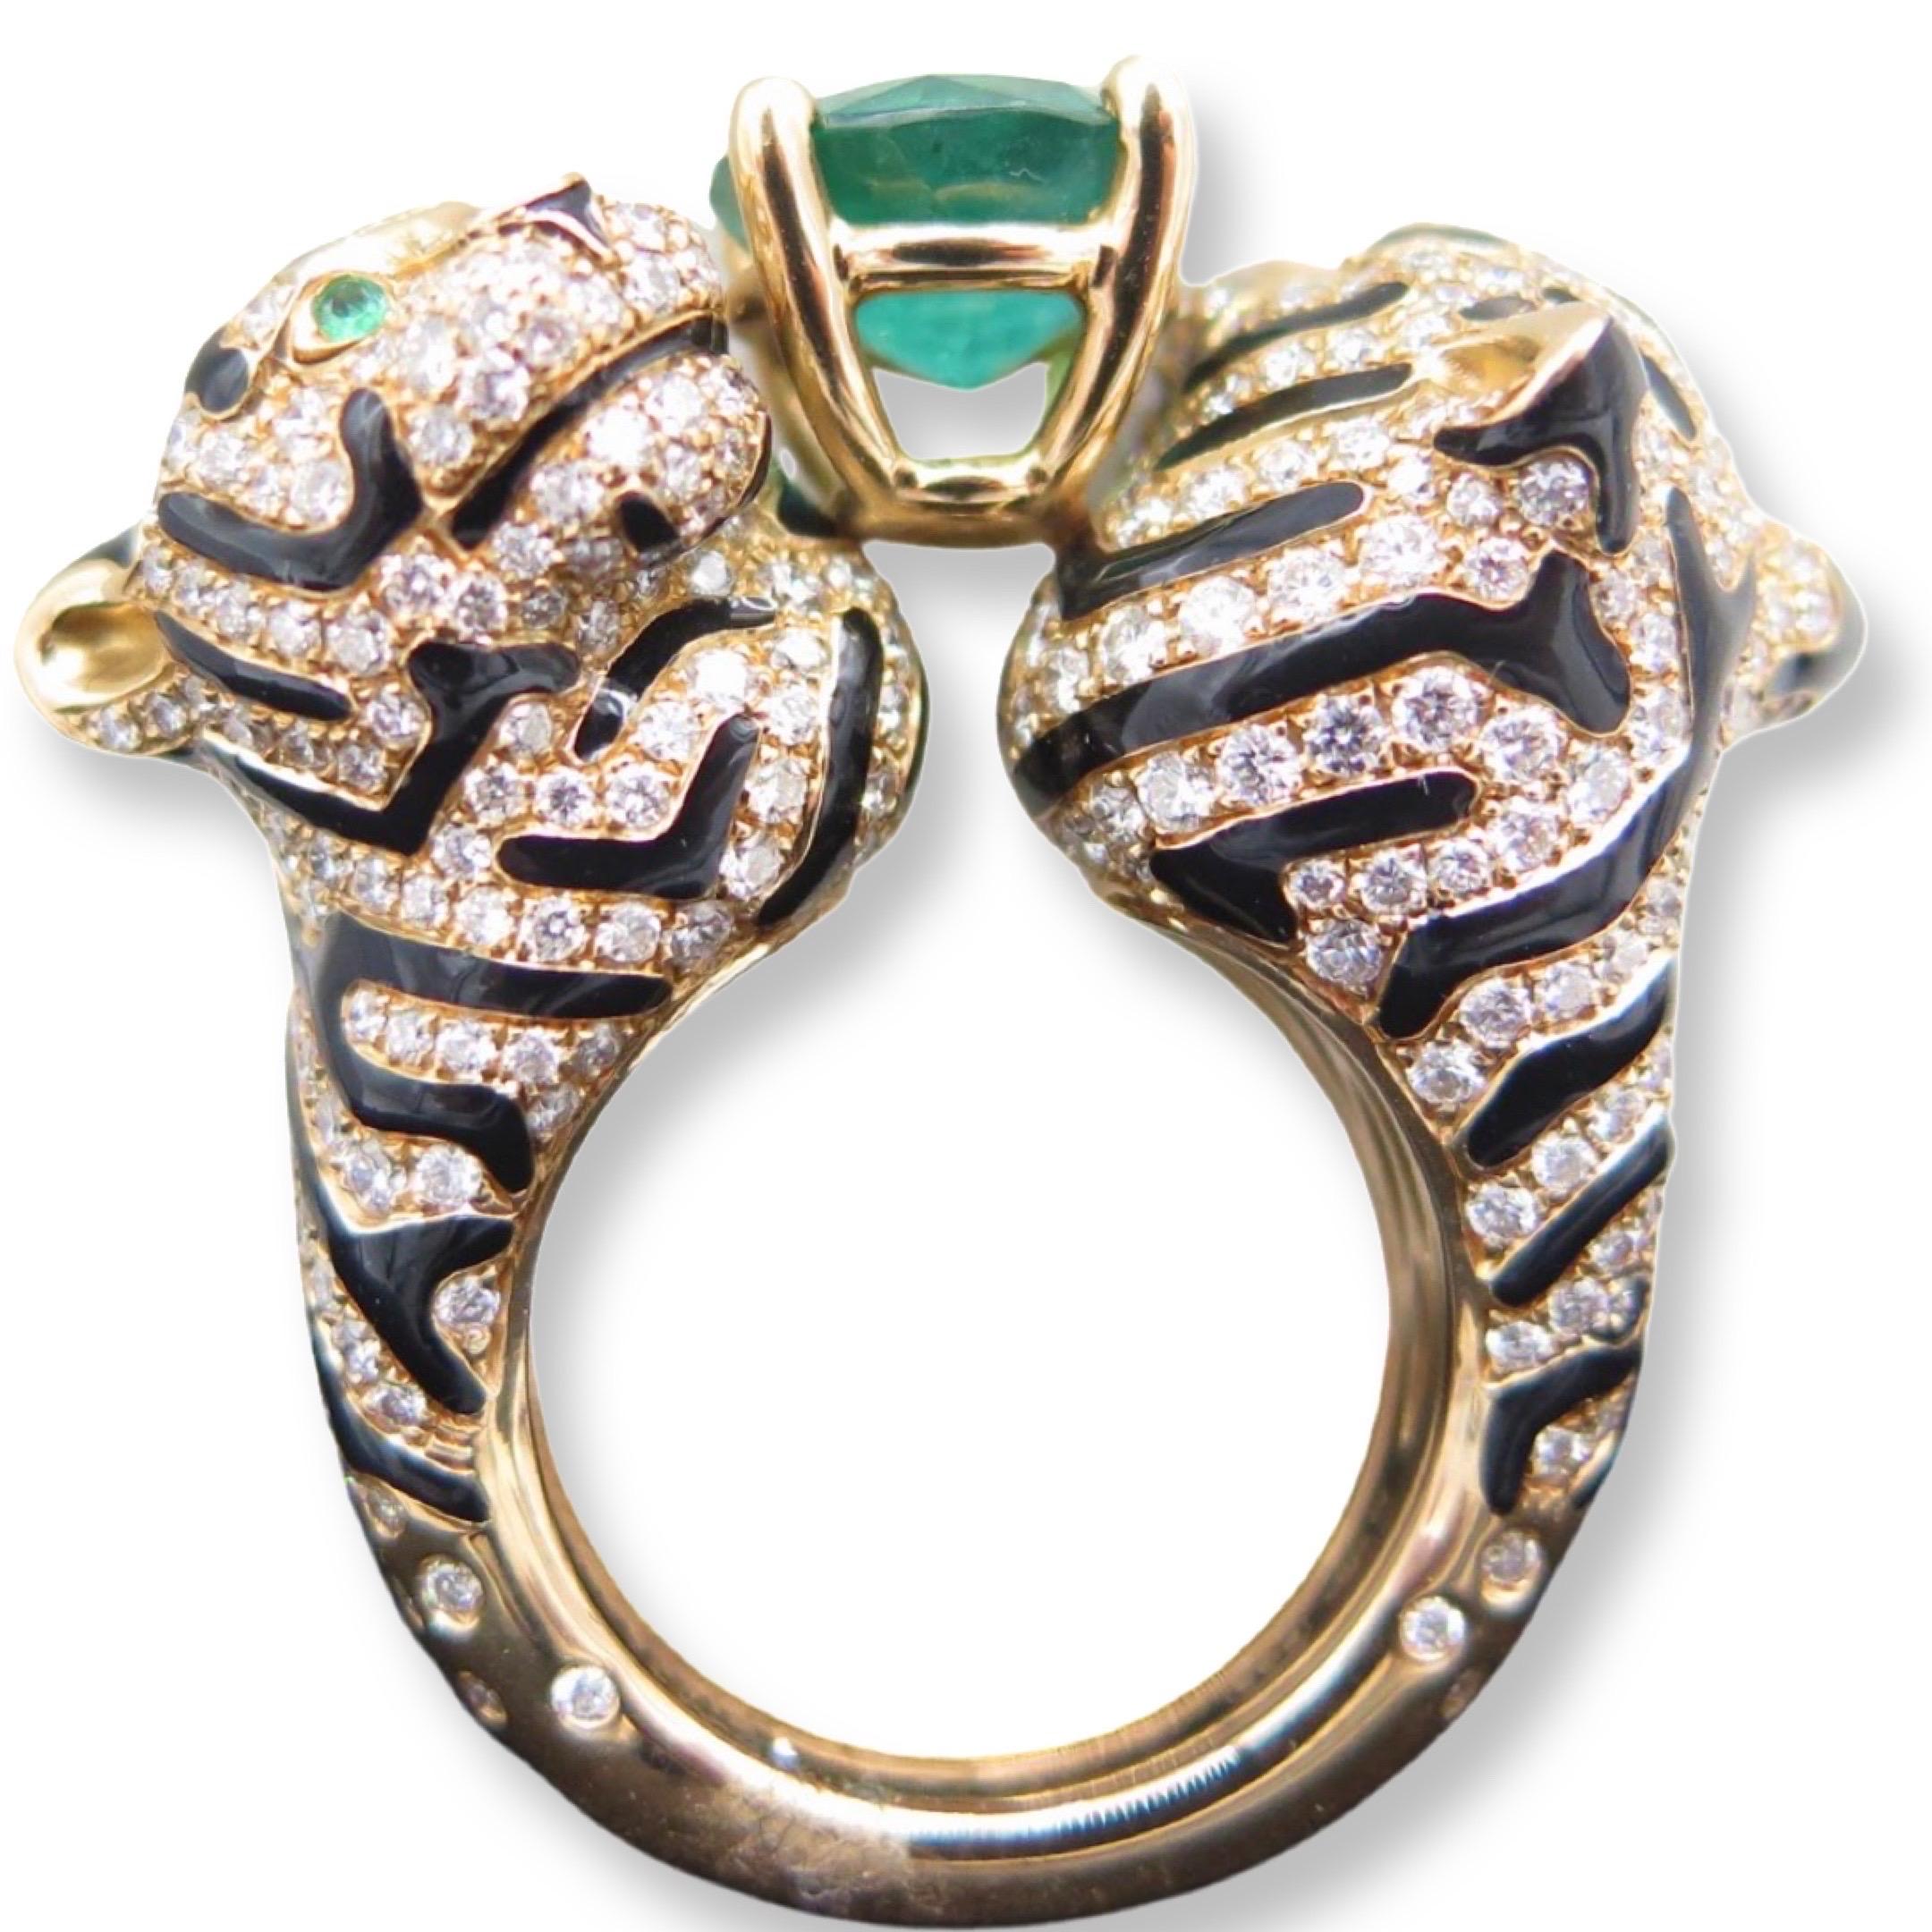 Nina & Co 18kt Diamond & Emerald Ring In Excellent Condition For Sale In West Palm Beach, FL